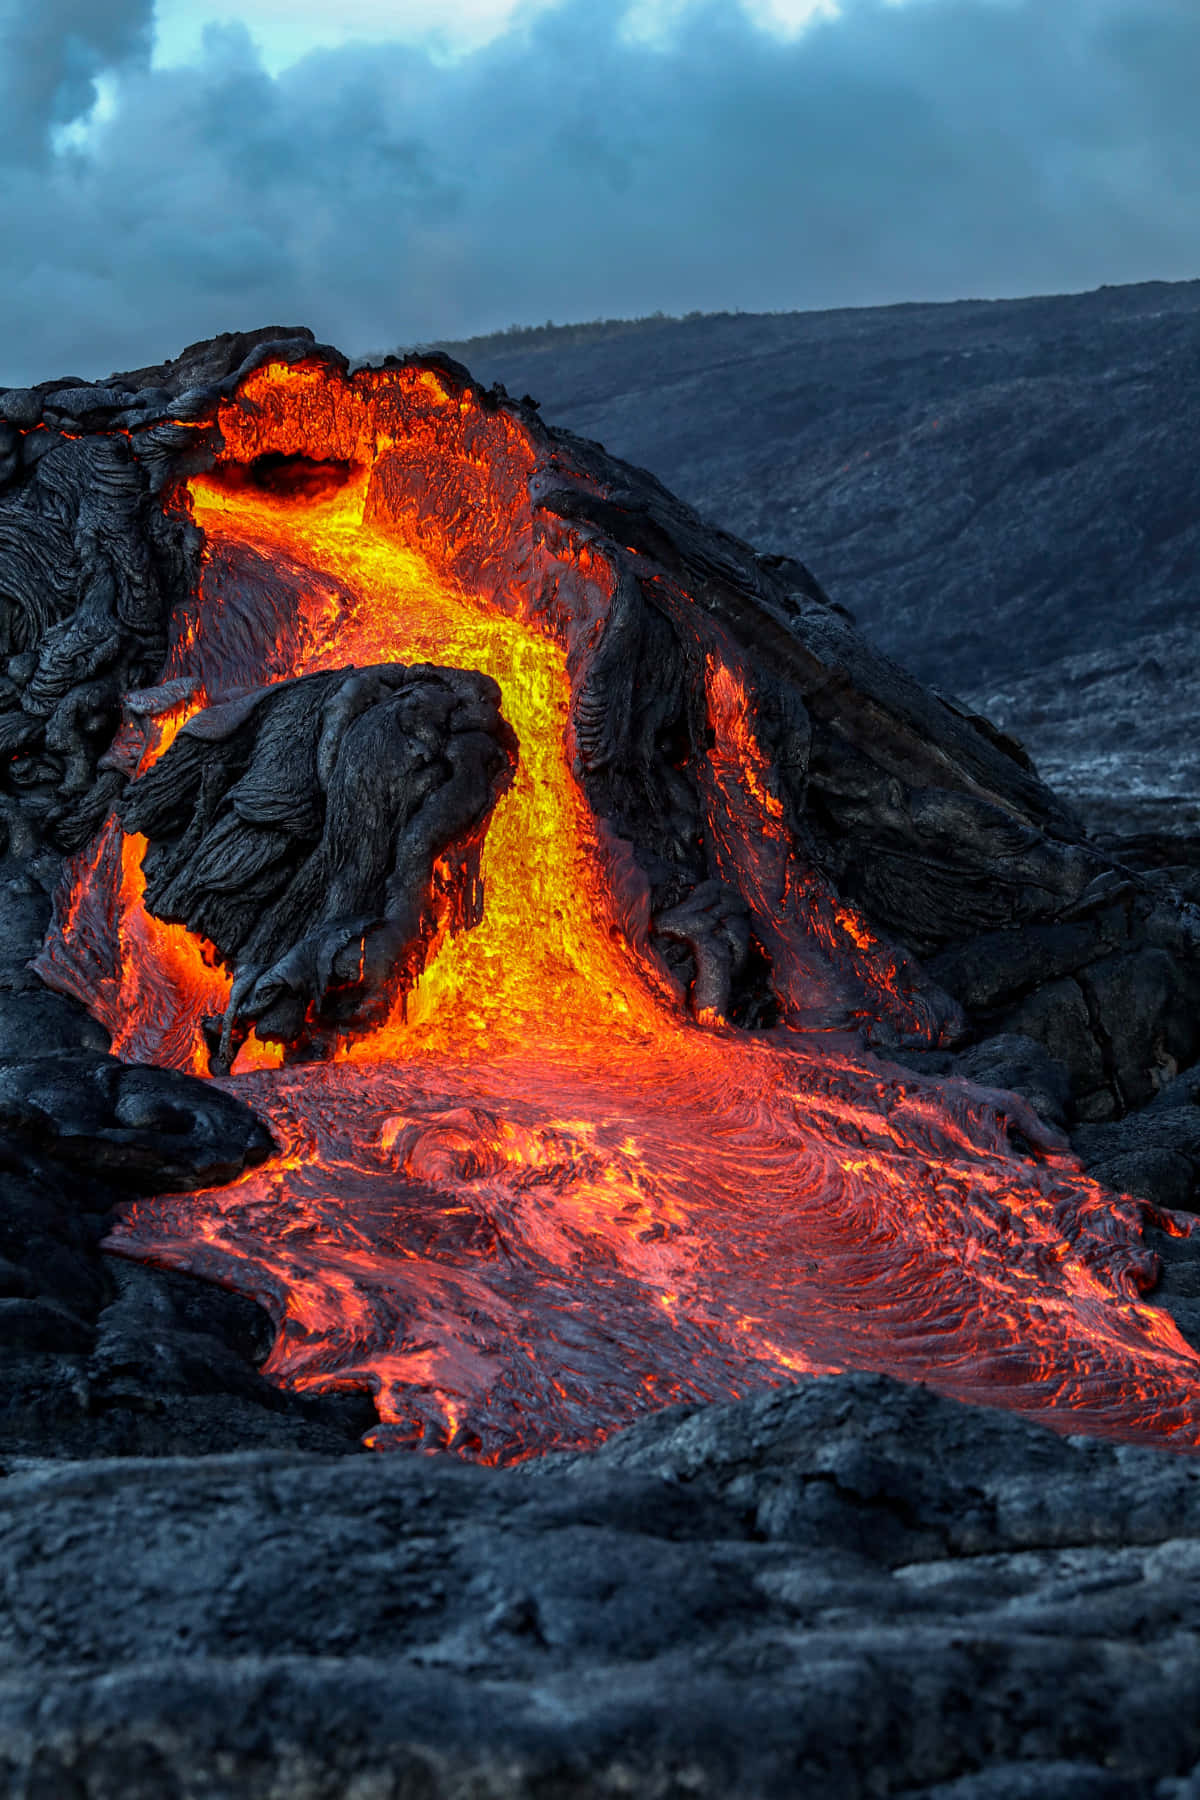 An erupting volcano in all its glory